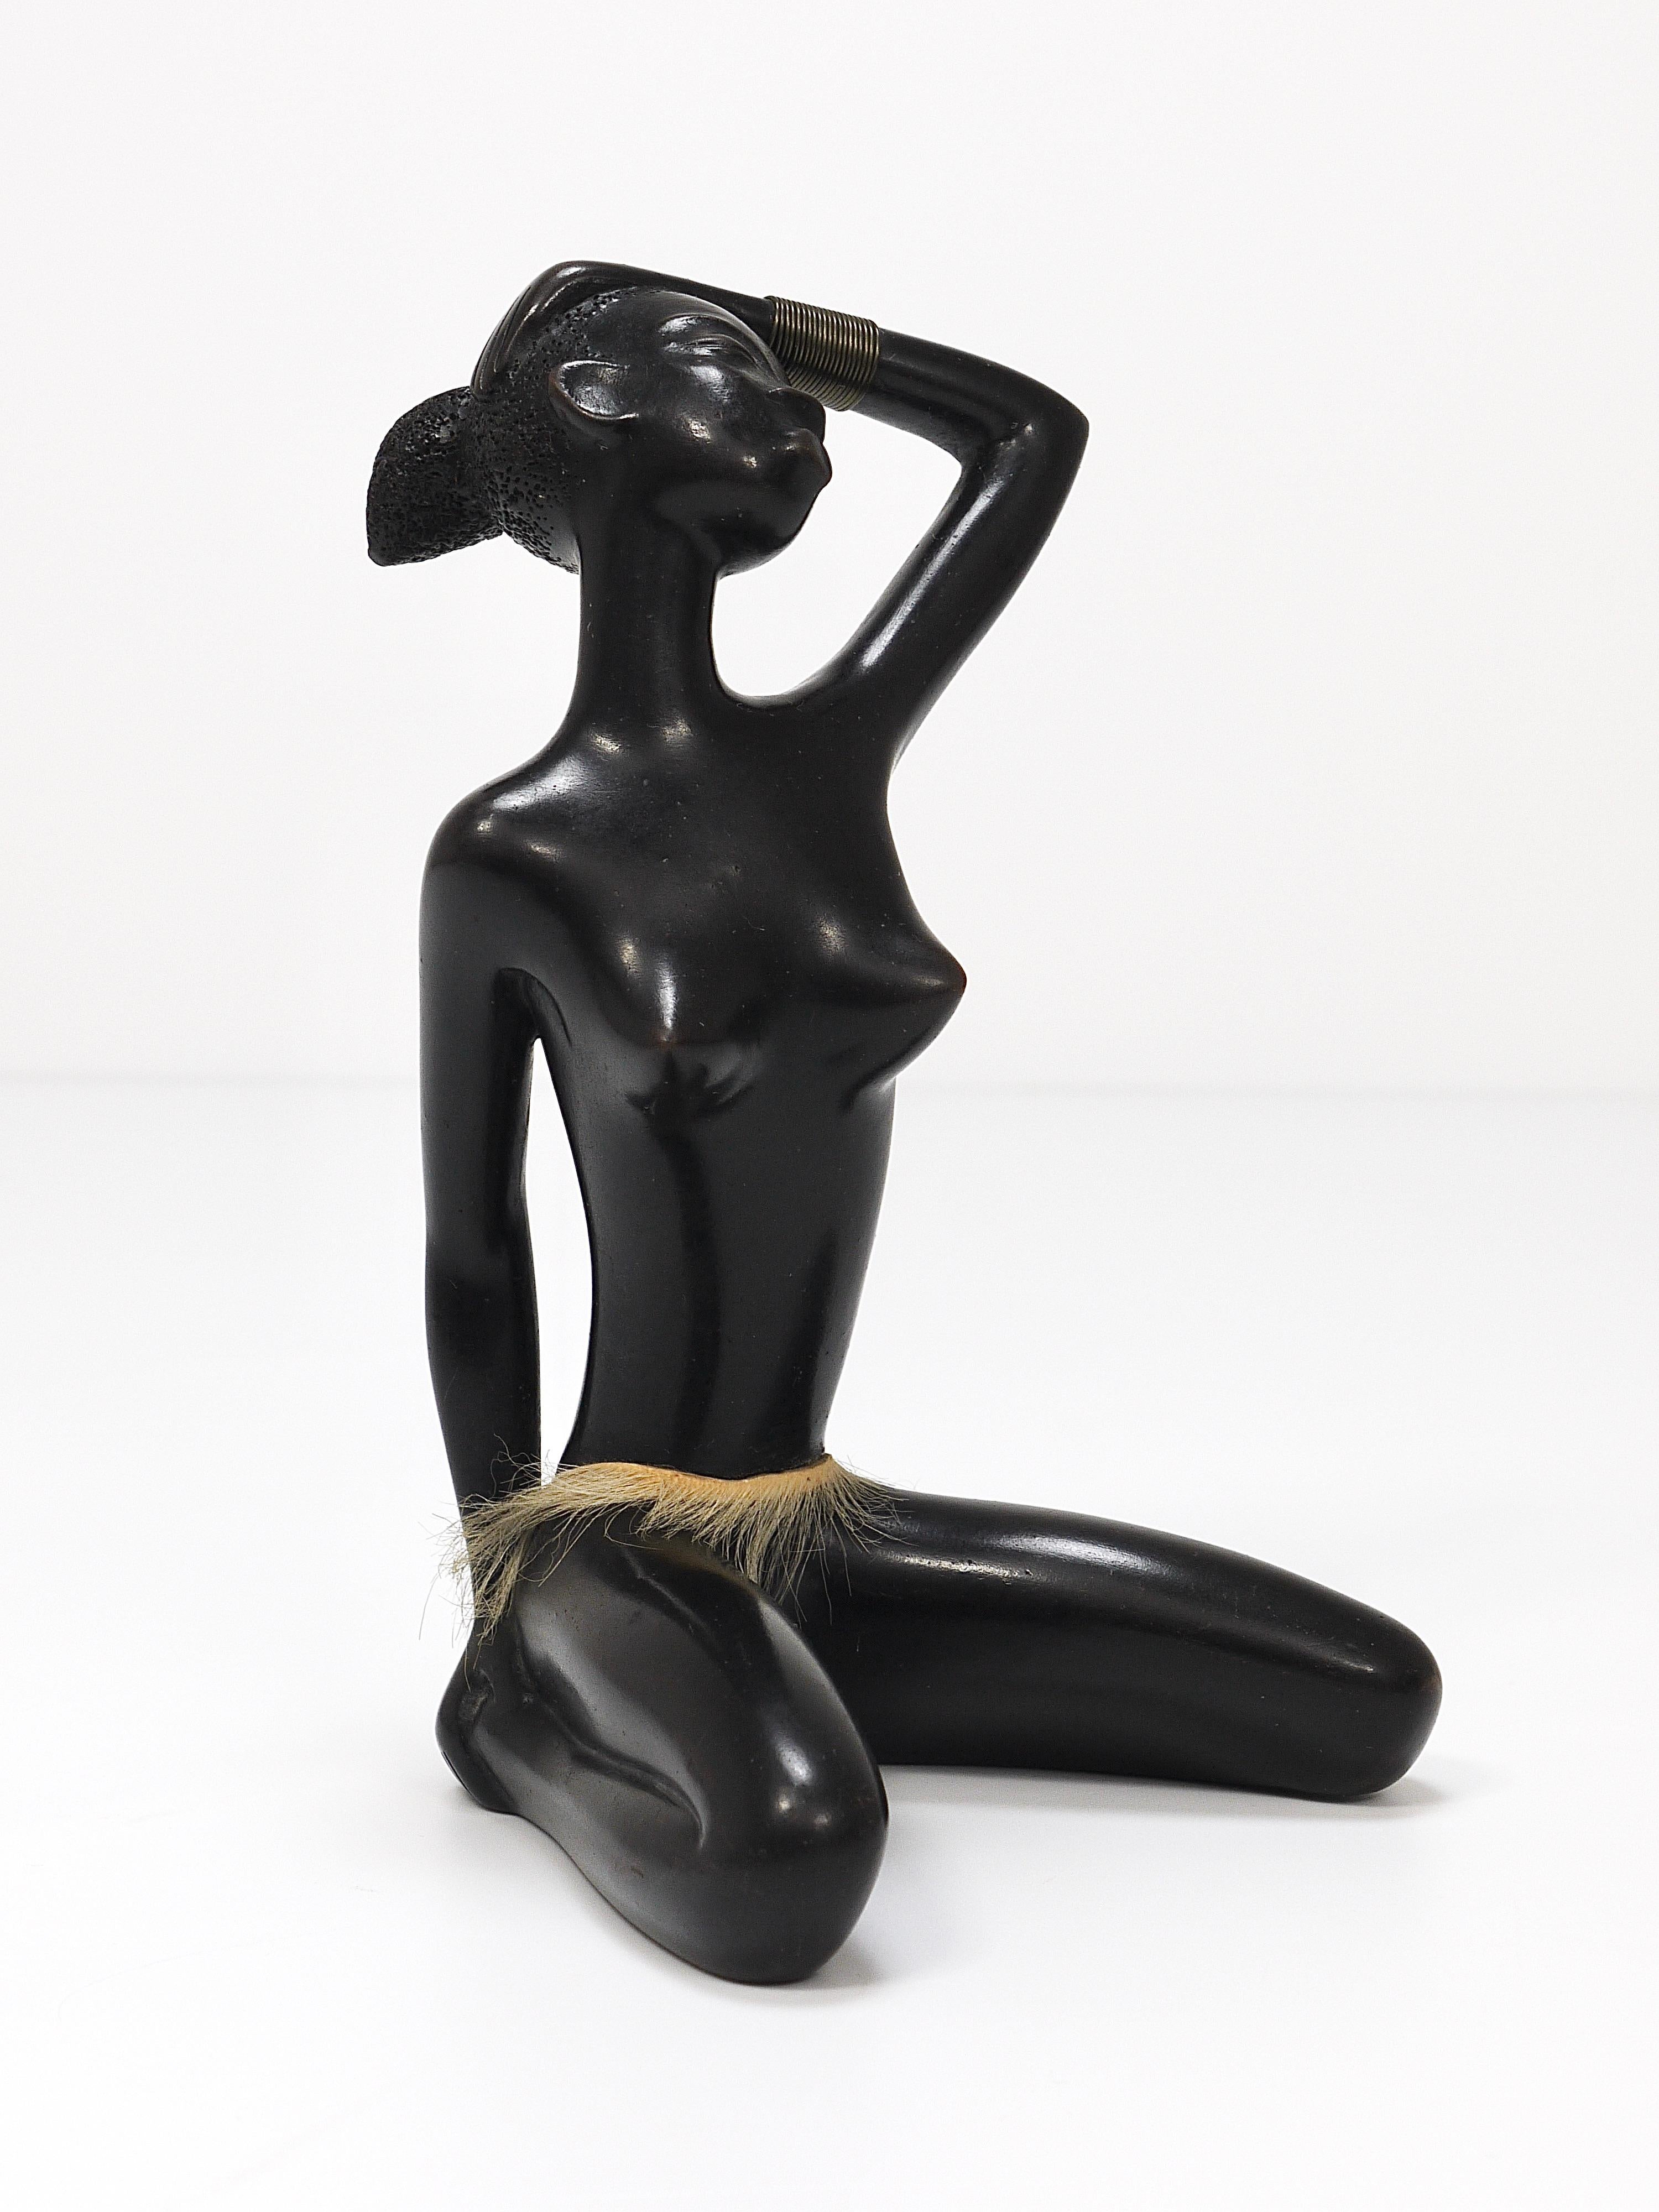 A beautiful and decorative, lovely detailed sculpture/ figurine, vintage from the 1950s, portraying a sitting nude African woman with a brass bracelet wearing a skirt. Designed and handcrafted by Leopold Anzengruber in Vienna, Austria. A decorative